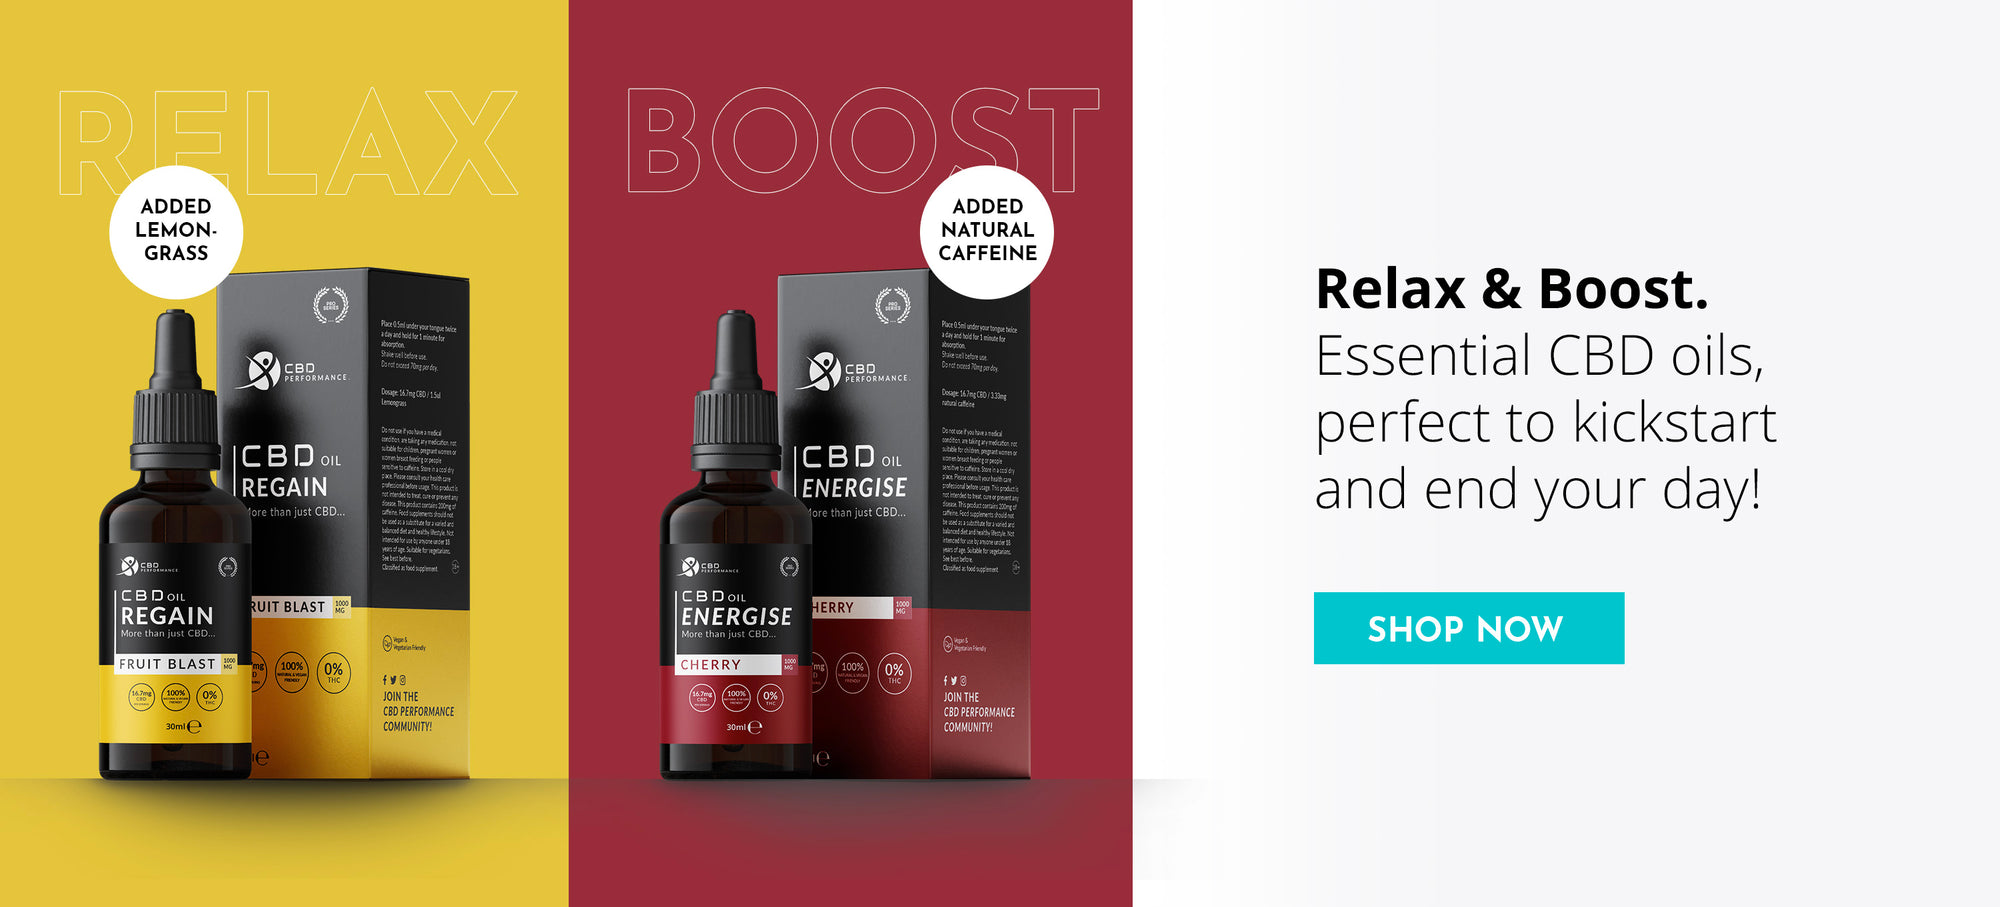 CBD oils for boosting and relaxing